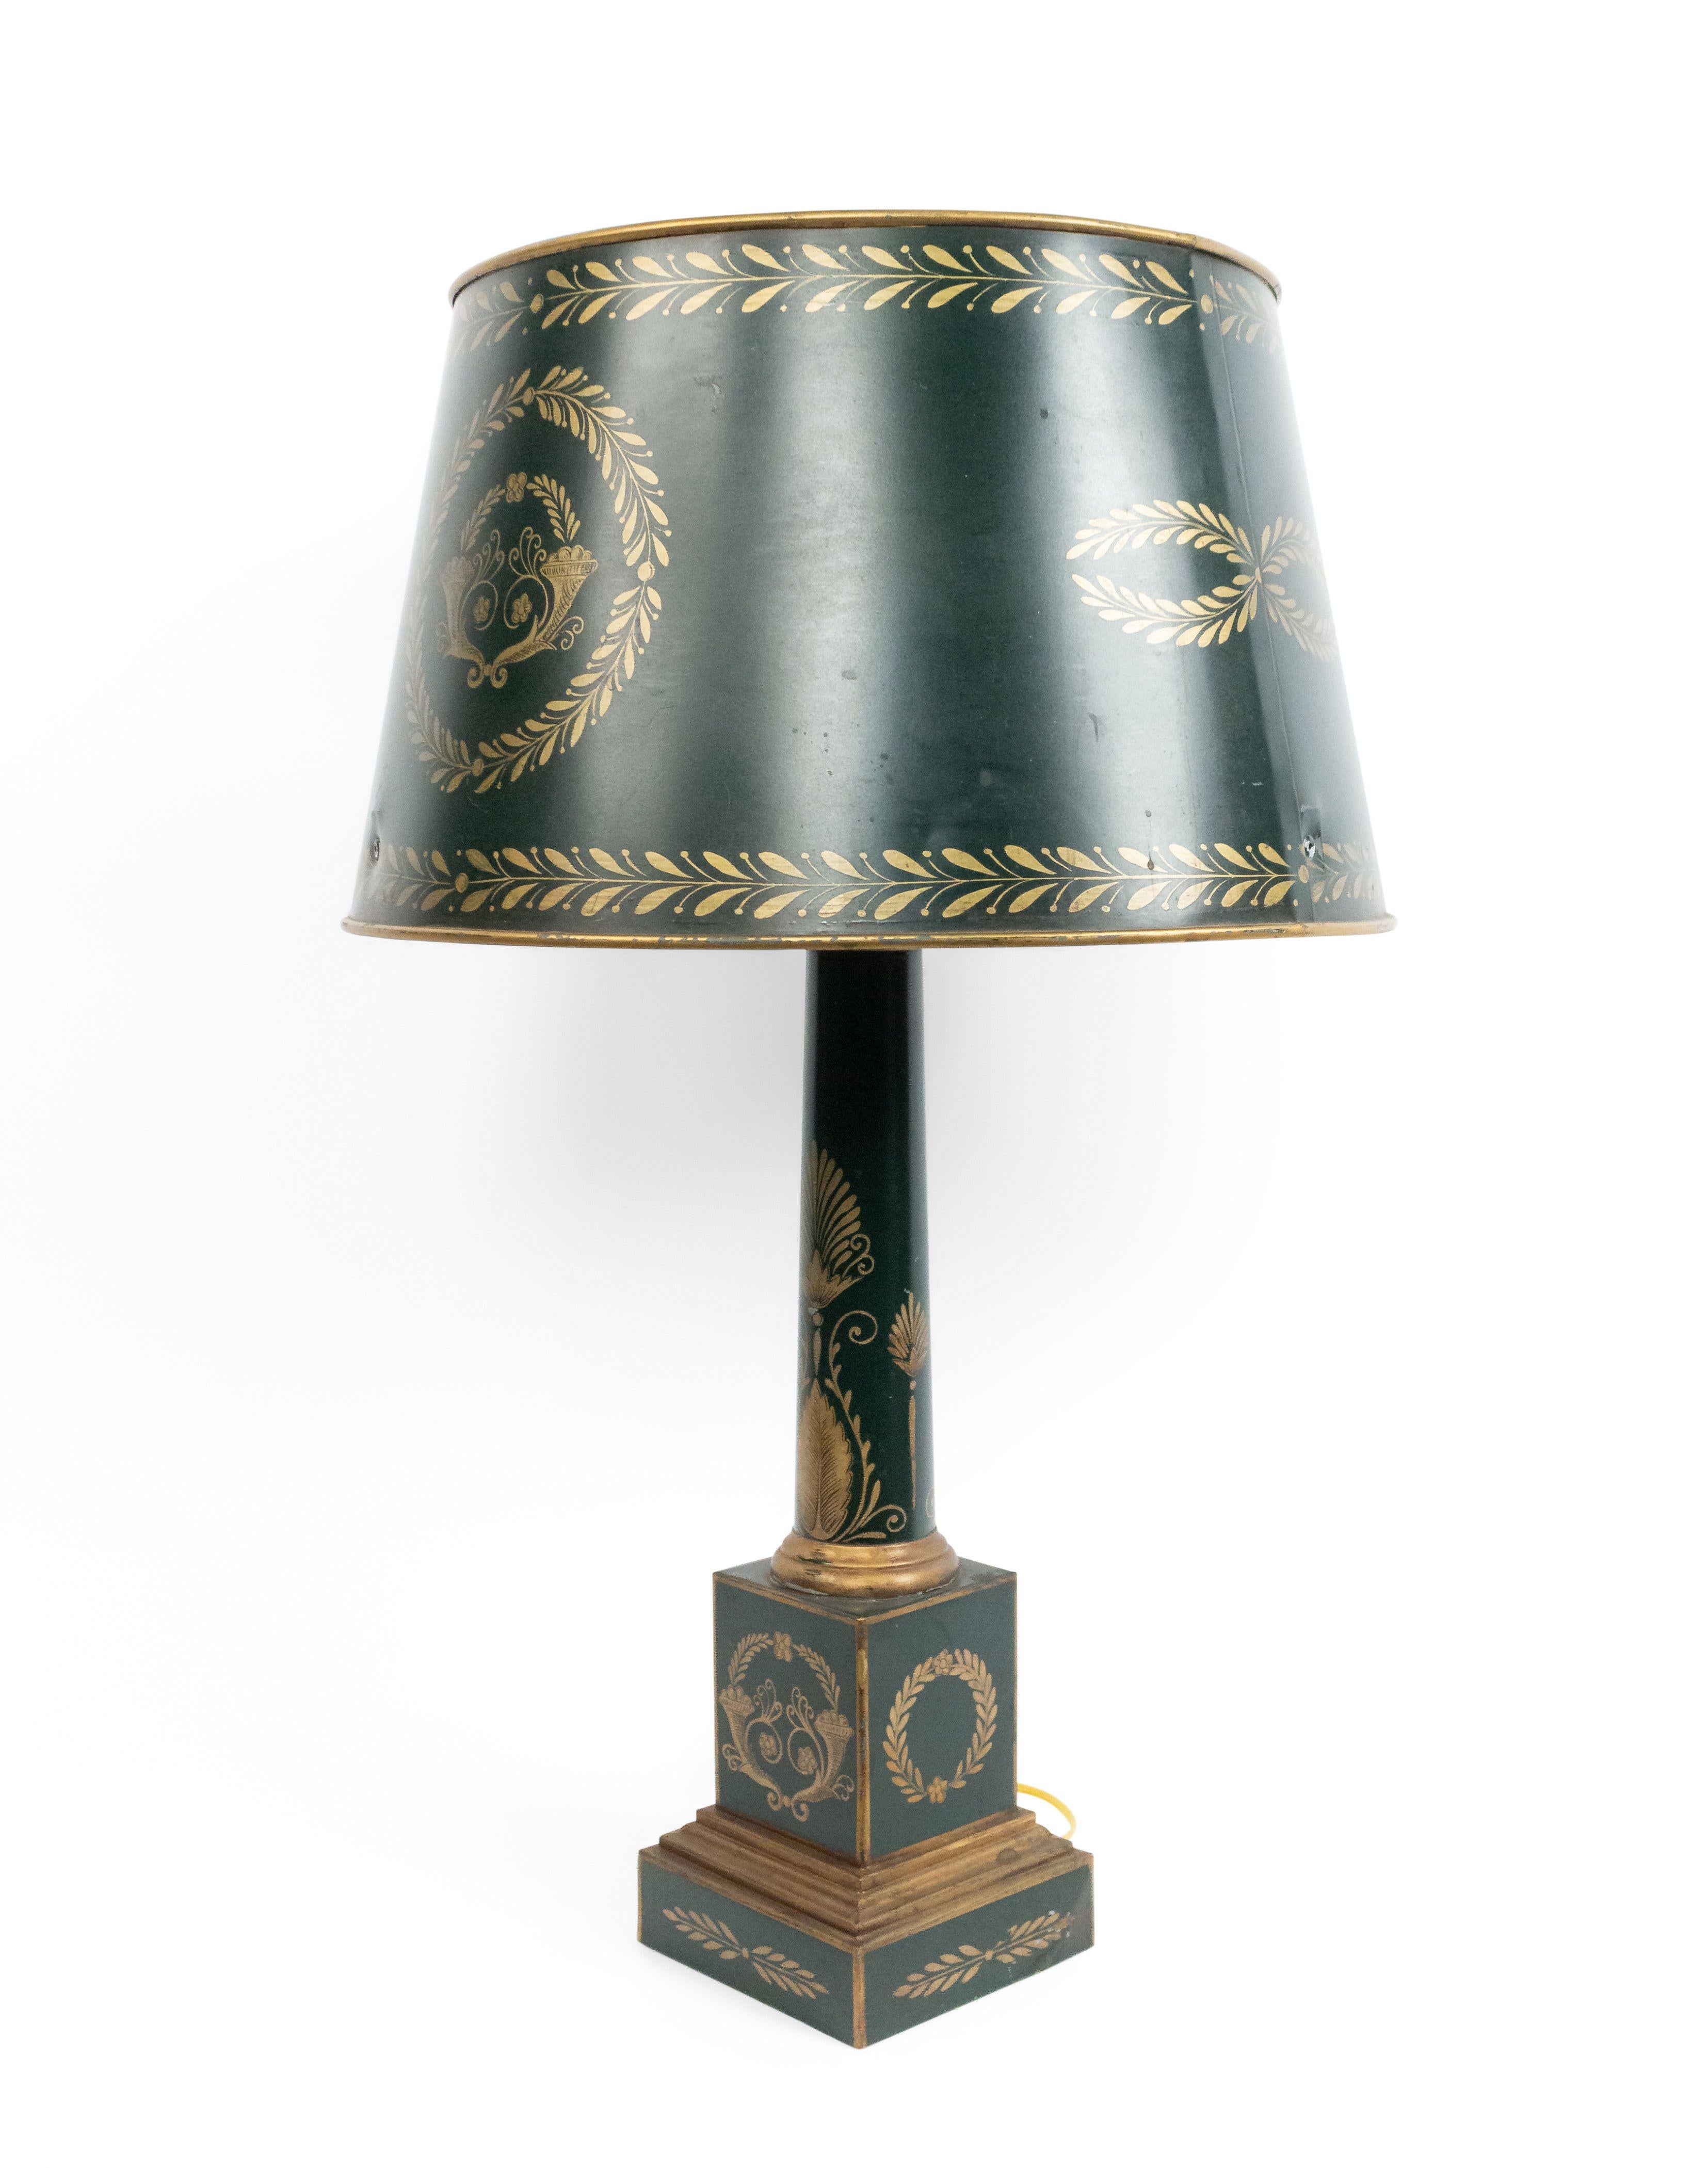 Pair of French Directoire style green tole and gilt decorated column table lamps with decorated shade 20th century.